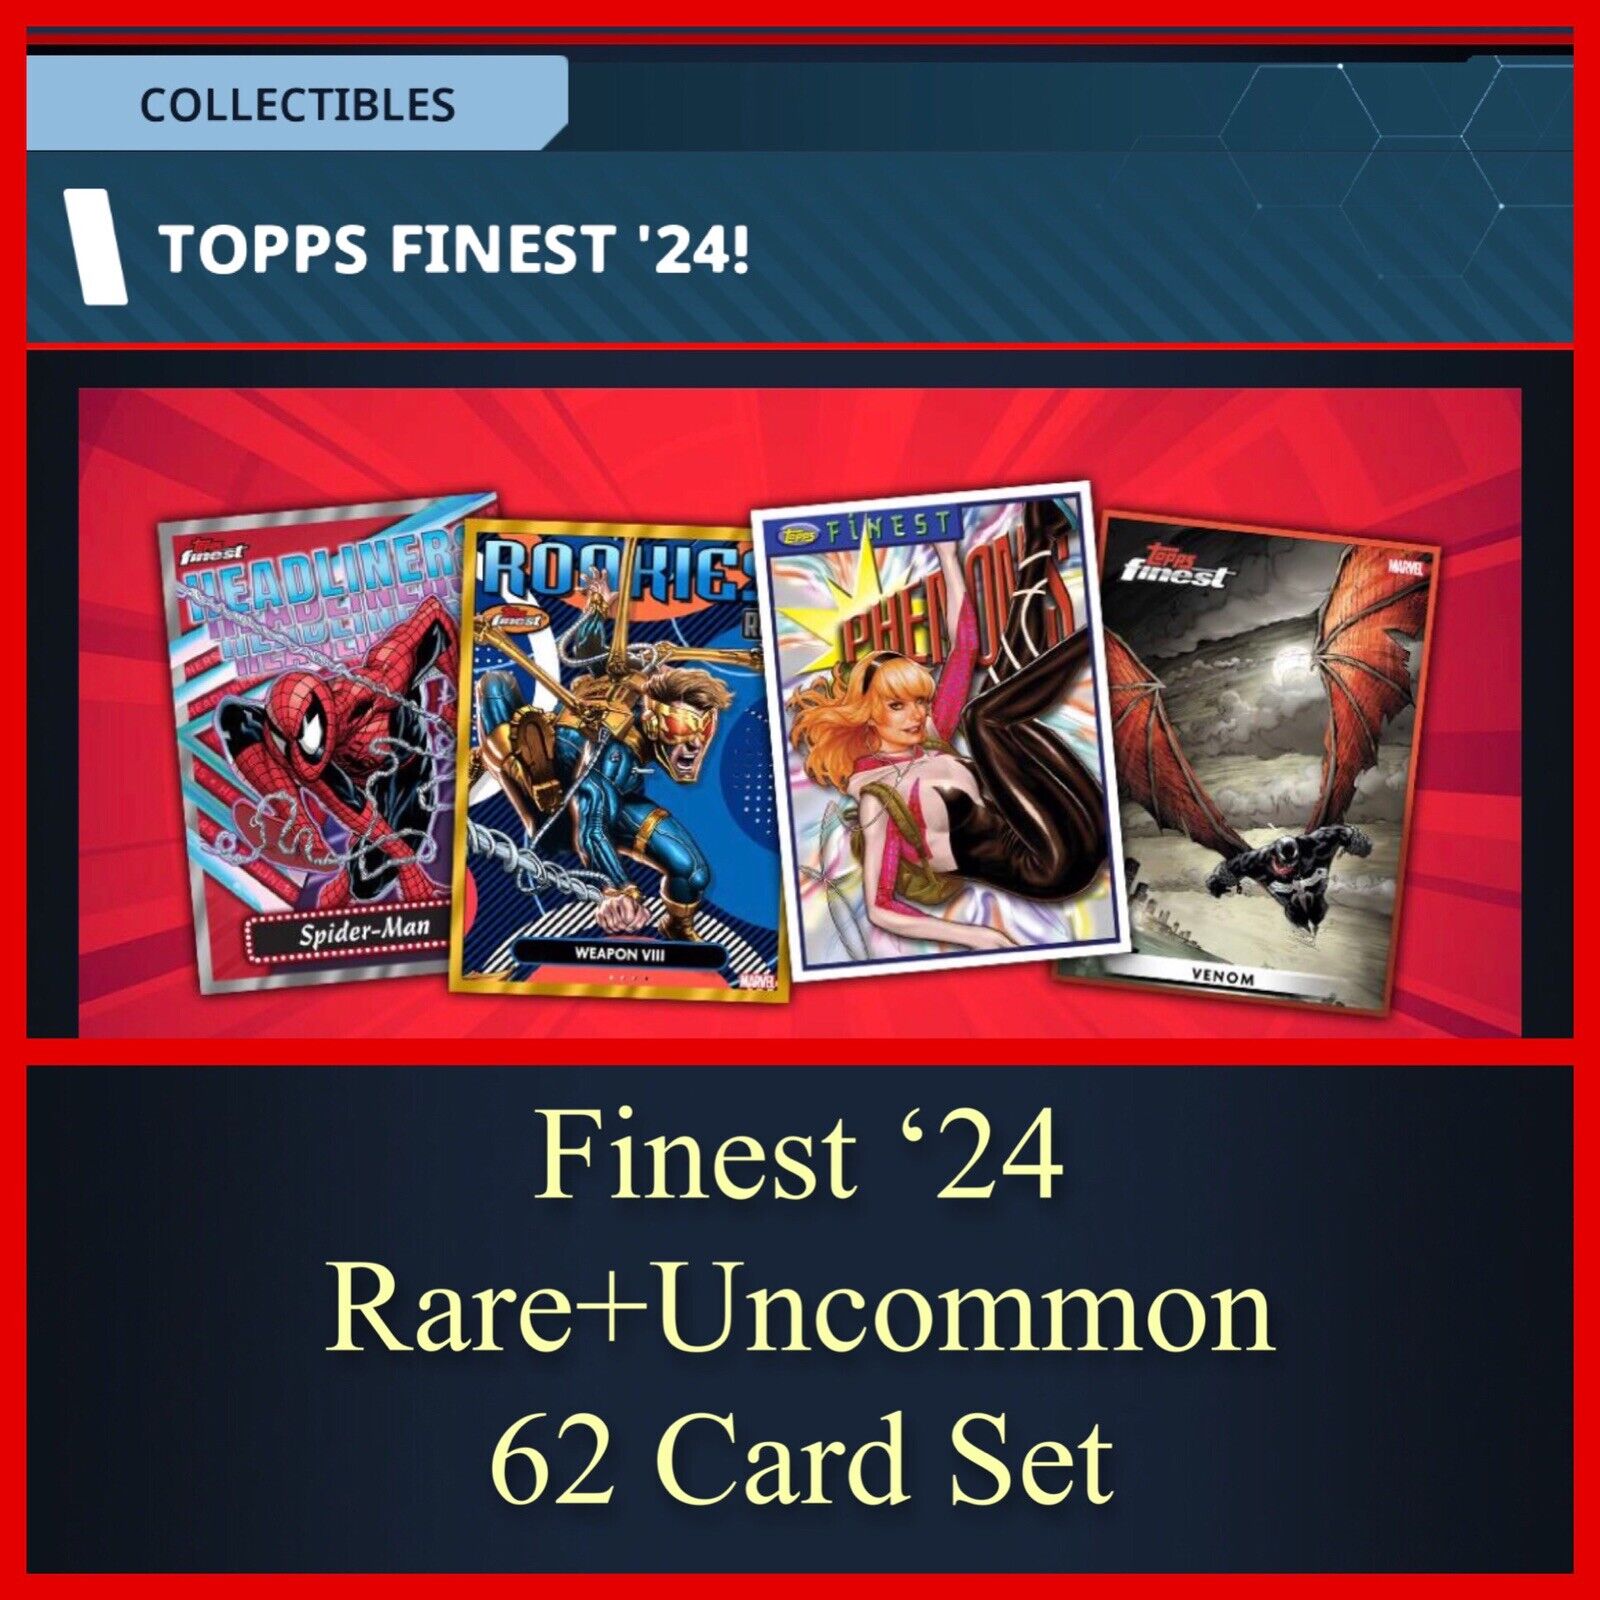 FINEST ‘24 RARE+UNCOMMON 62 CARD SET-TOPPS MARVEL COLLECT